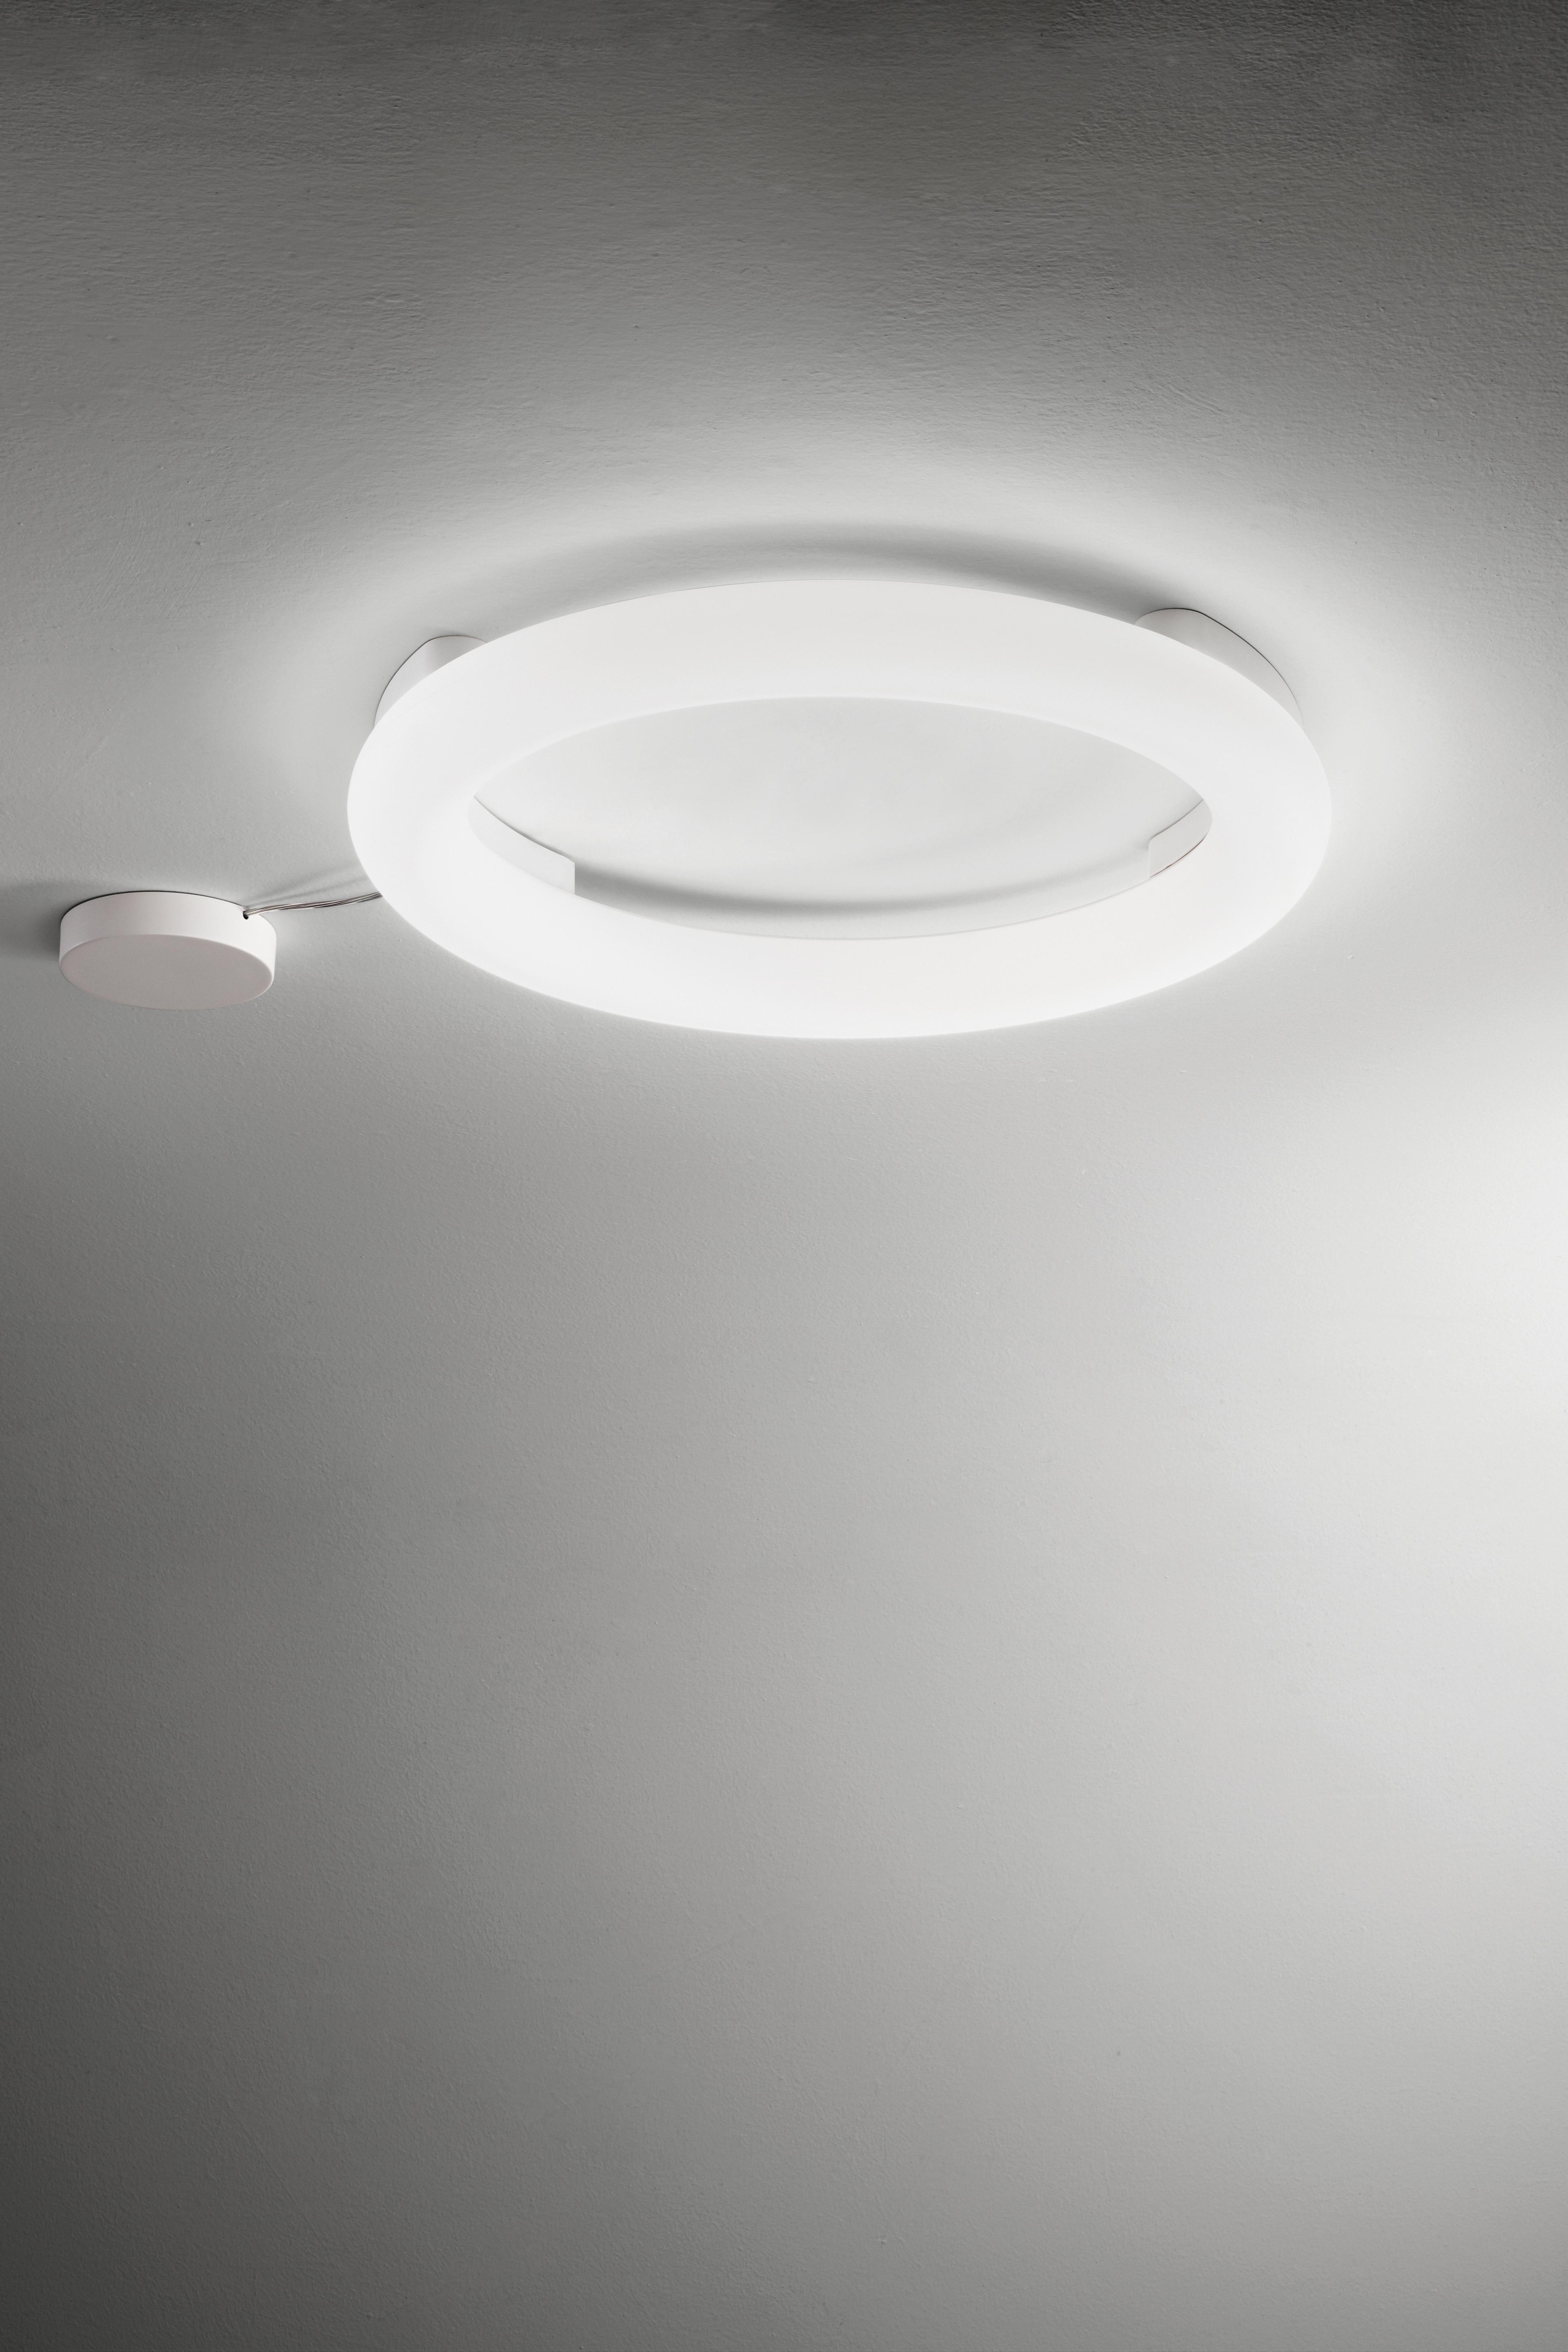 Gallery Product Polo Ceiling Linealightgroup 1280X1920 5